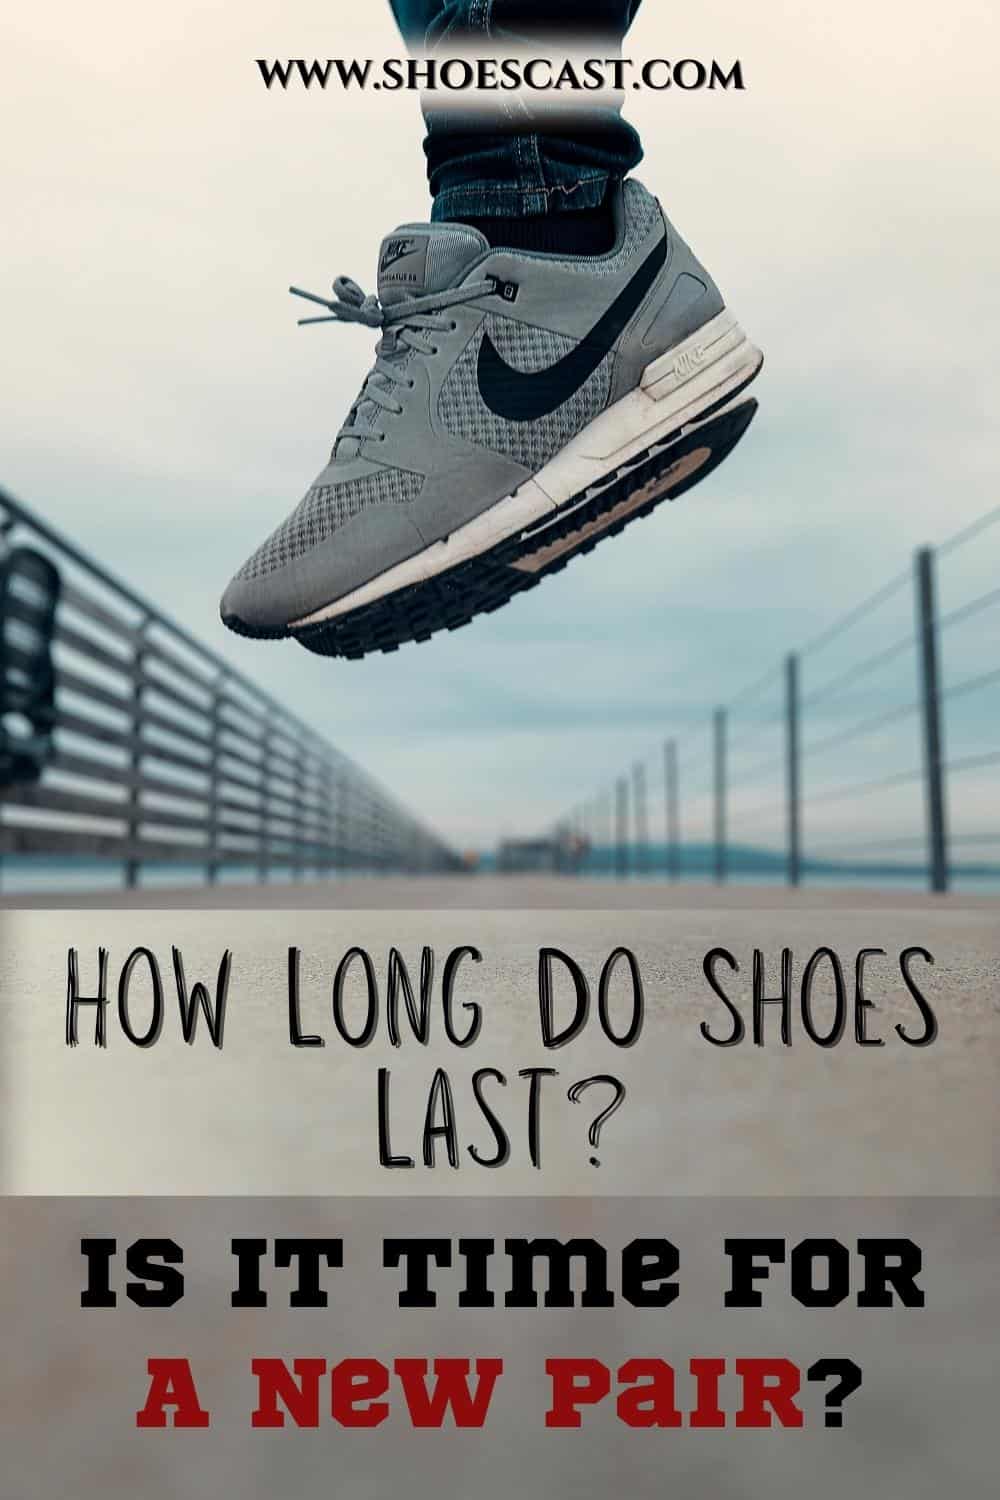 How Long Do Shoes Last? Is It Time For A New Pair?